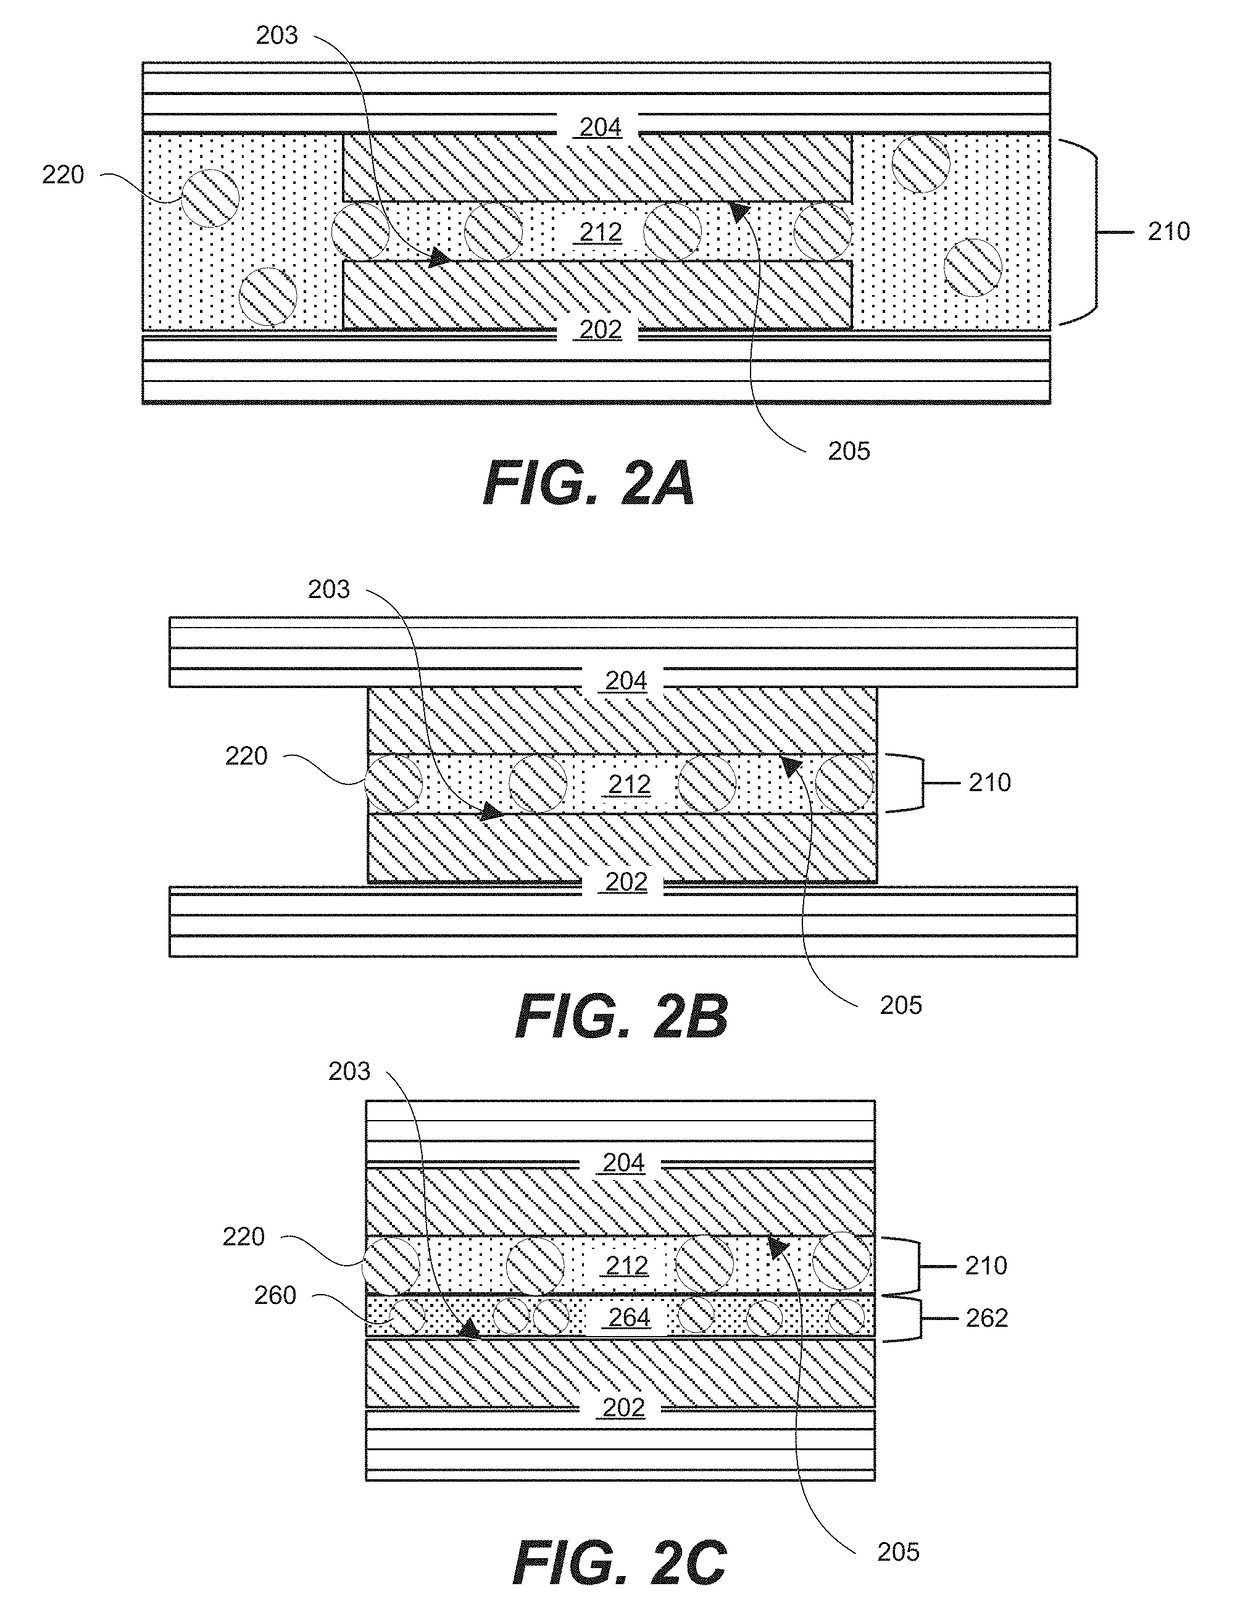 Bonding using conductive particles in conducting adhesives